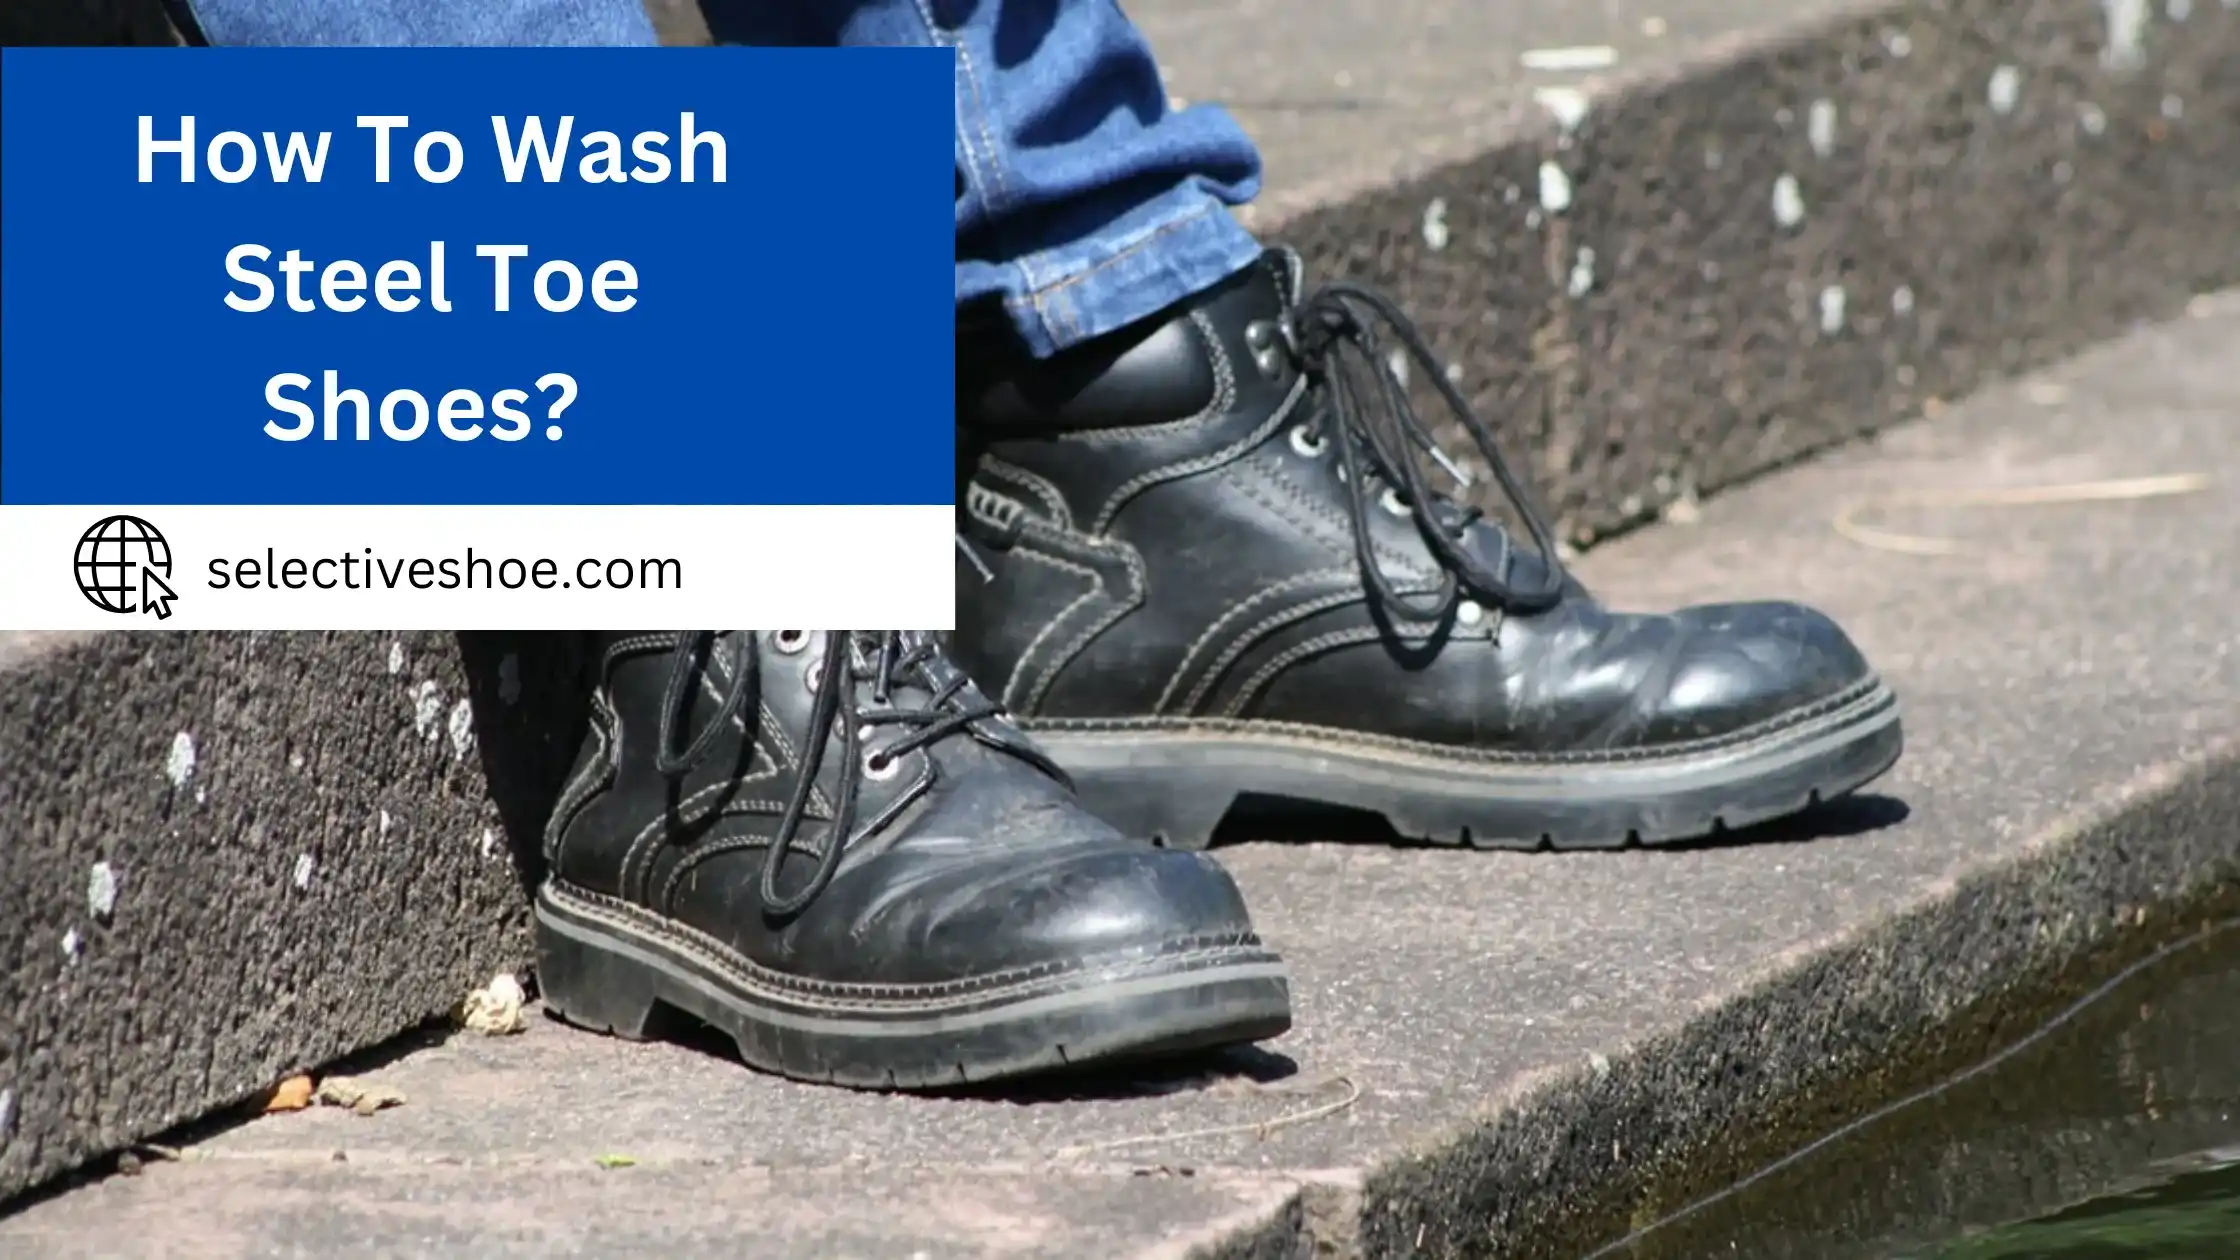 How To Wash Steel Toe Shoes? Cleaning Instructions